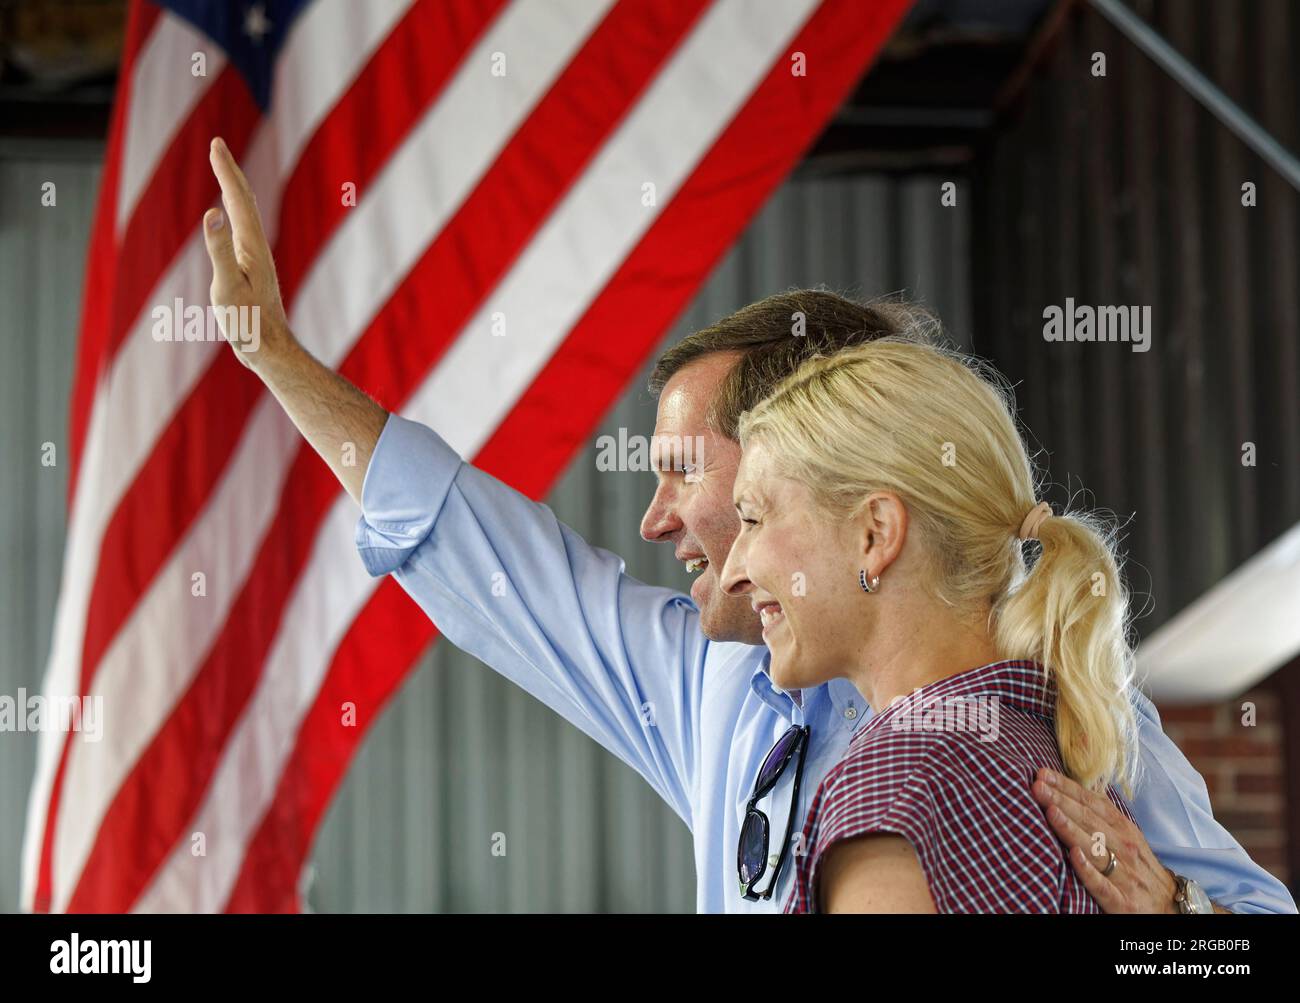 Kentucky Gov. Andy Beshear waves to the crowd with his wife, first lady Britainy Beshear, by his side at the 143rd St. Jerome Fancy Farm Picnic on Saturday, Aug. 5, 2023 in Fancy Farm, Graves County, KY, USA. Incumbent Democrat Beshear is seeking a second term as governor of the Commonwealth of Kentucky against Republican nominee Daniel Cameron. (Apex MediaWire Photo by Billy Suratt) Stock Photo